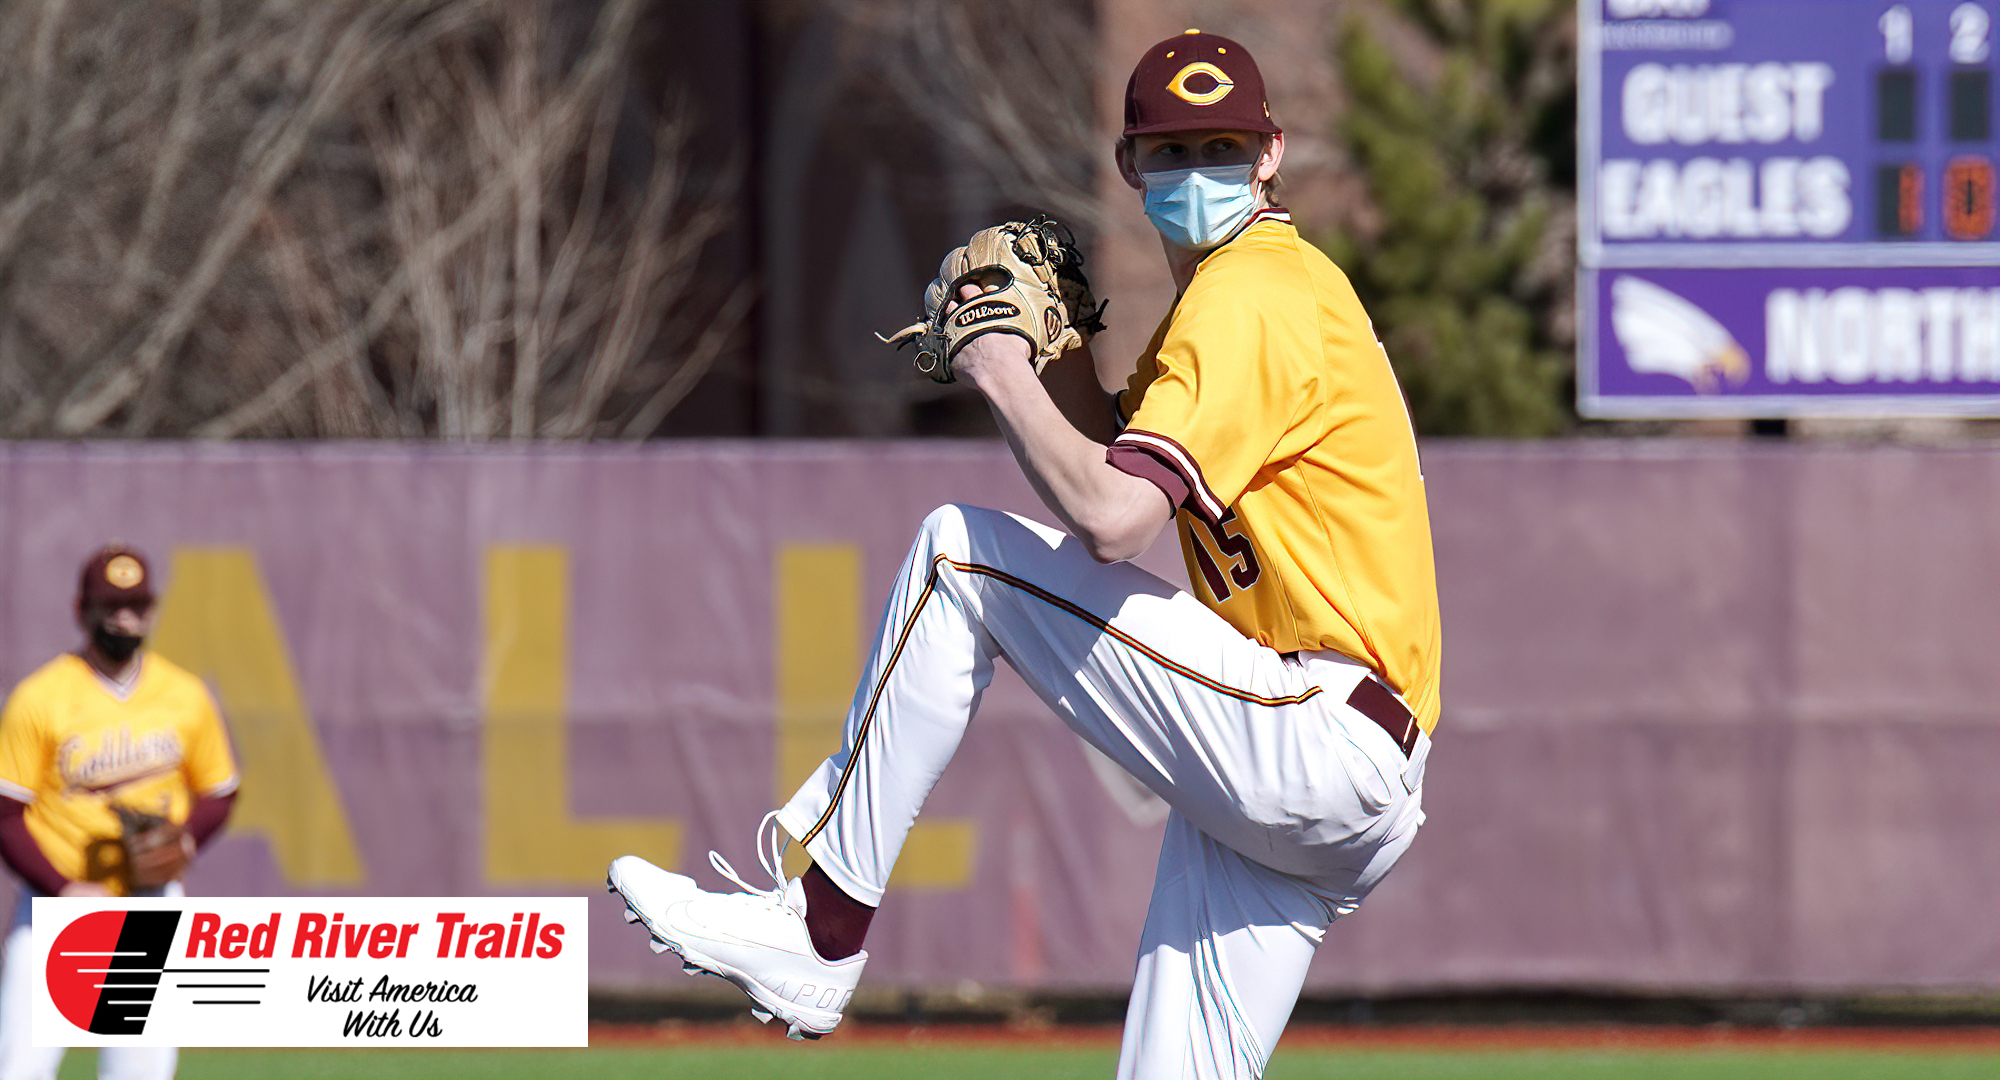 Senior Ty Syverson gets ready to deliver a pitch in the Cobbers' 10-2 win over Crown in Game 1. Syverson struck out nine for his second straight start and leads the MIAC in Ks. (Pic courtesy of Crown Sports Information).